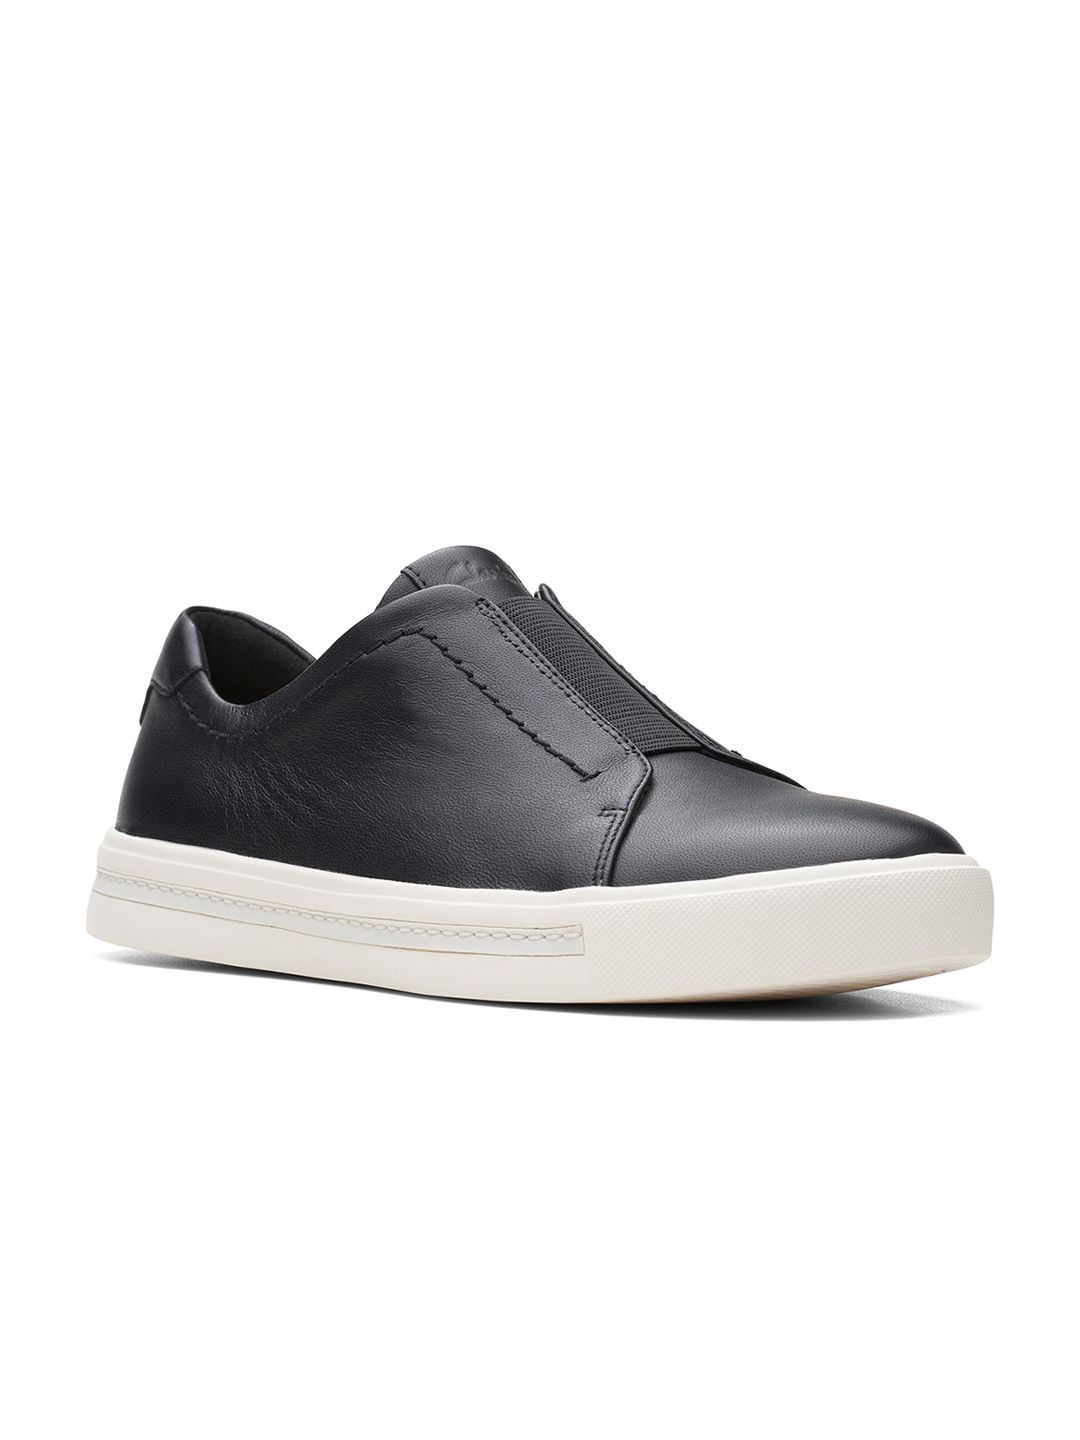 Clarks Women Leather Slip-On Sneakers Price in India